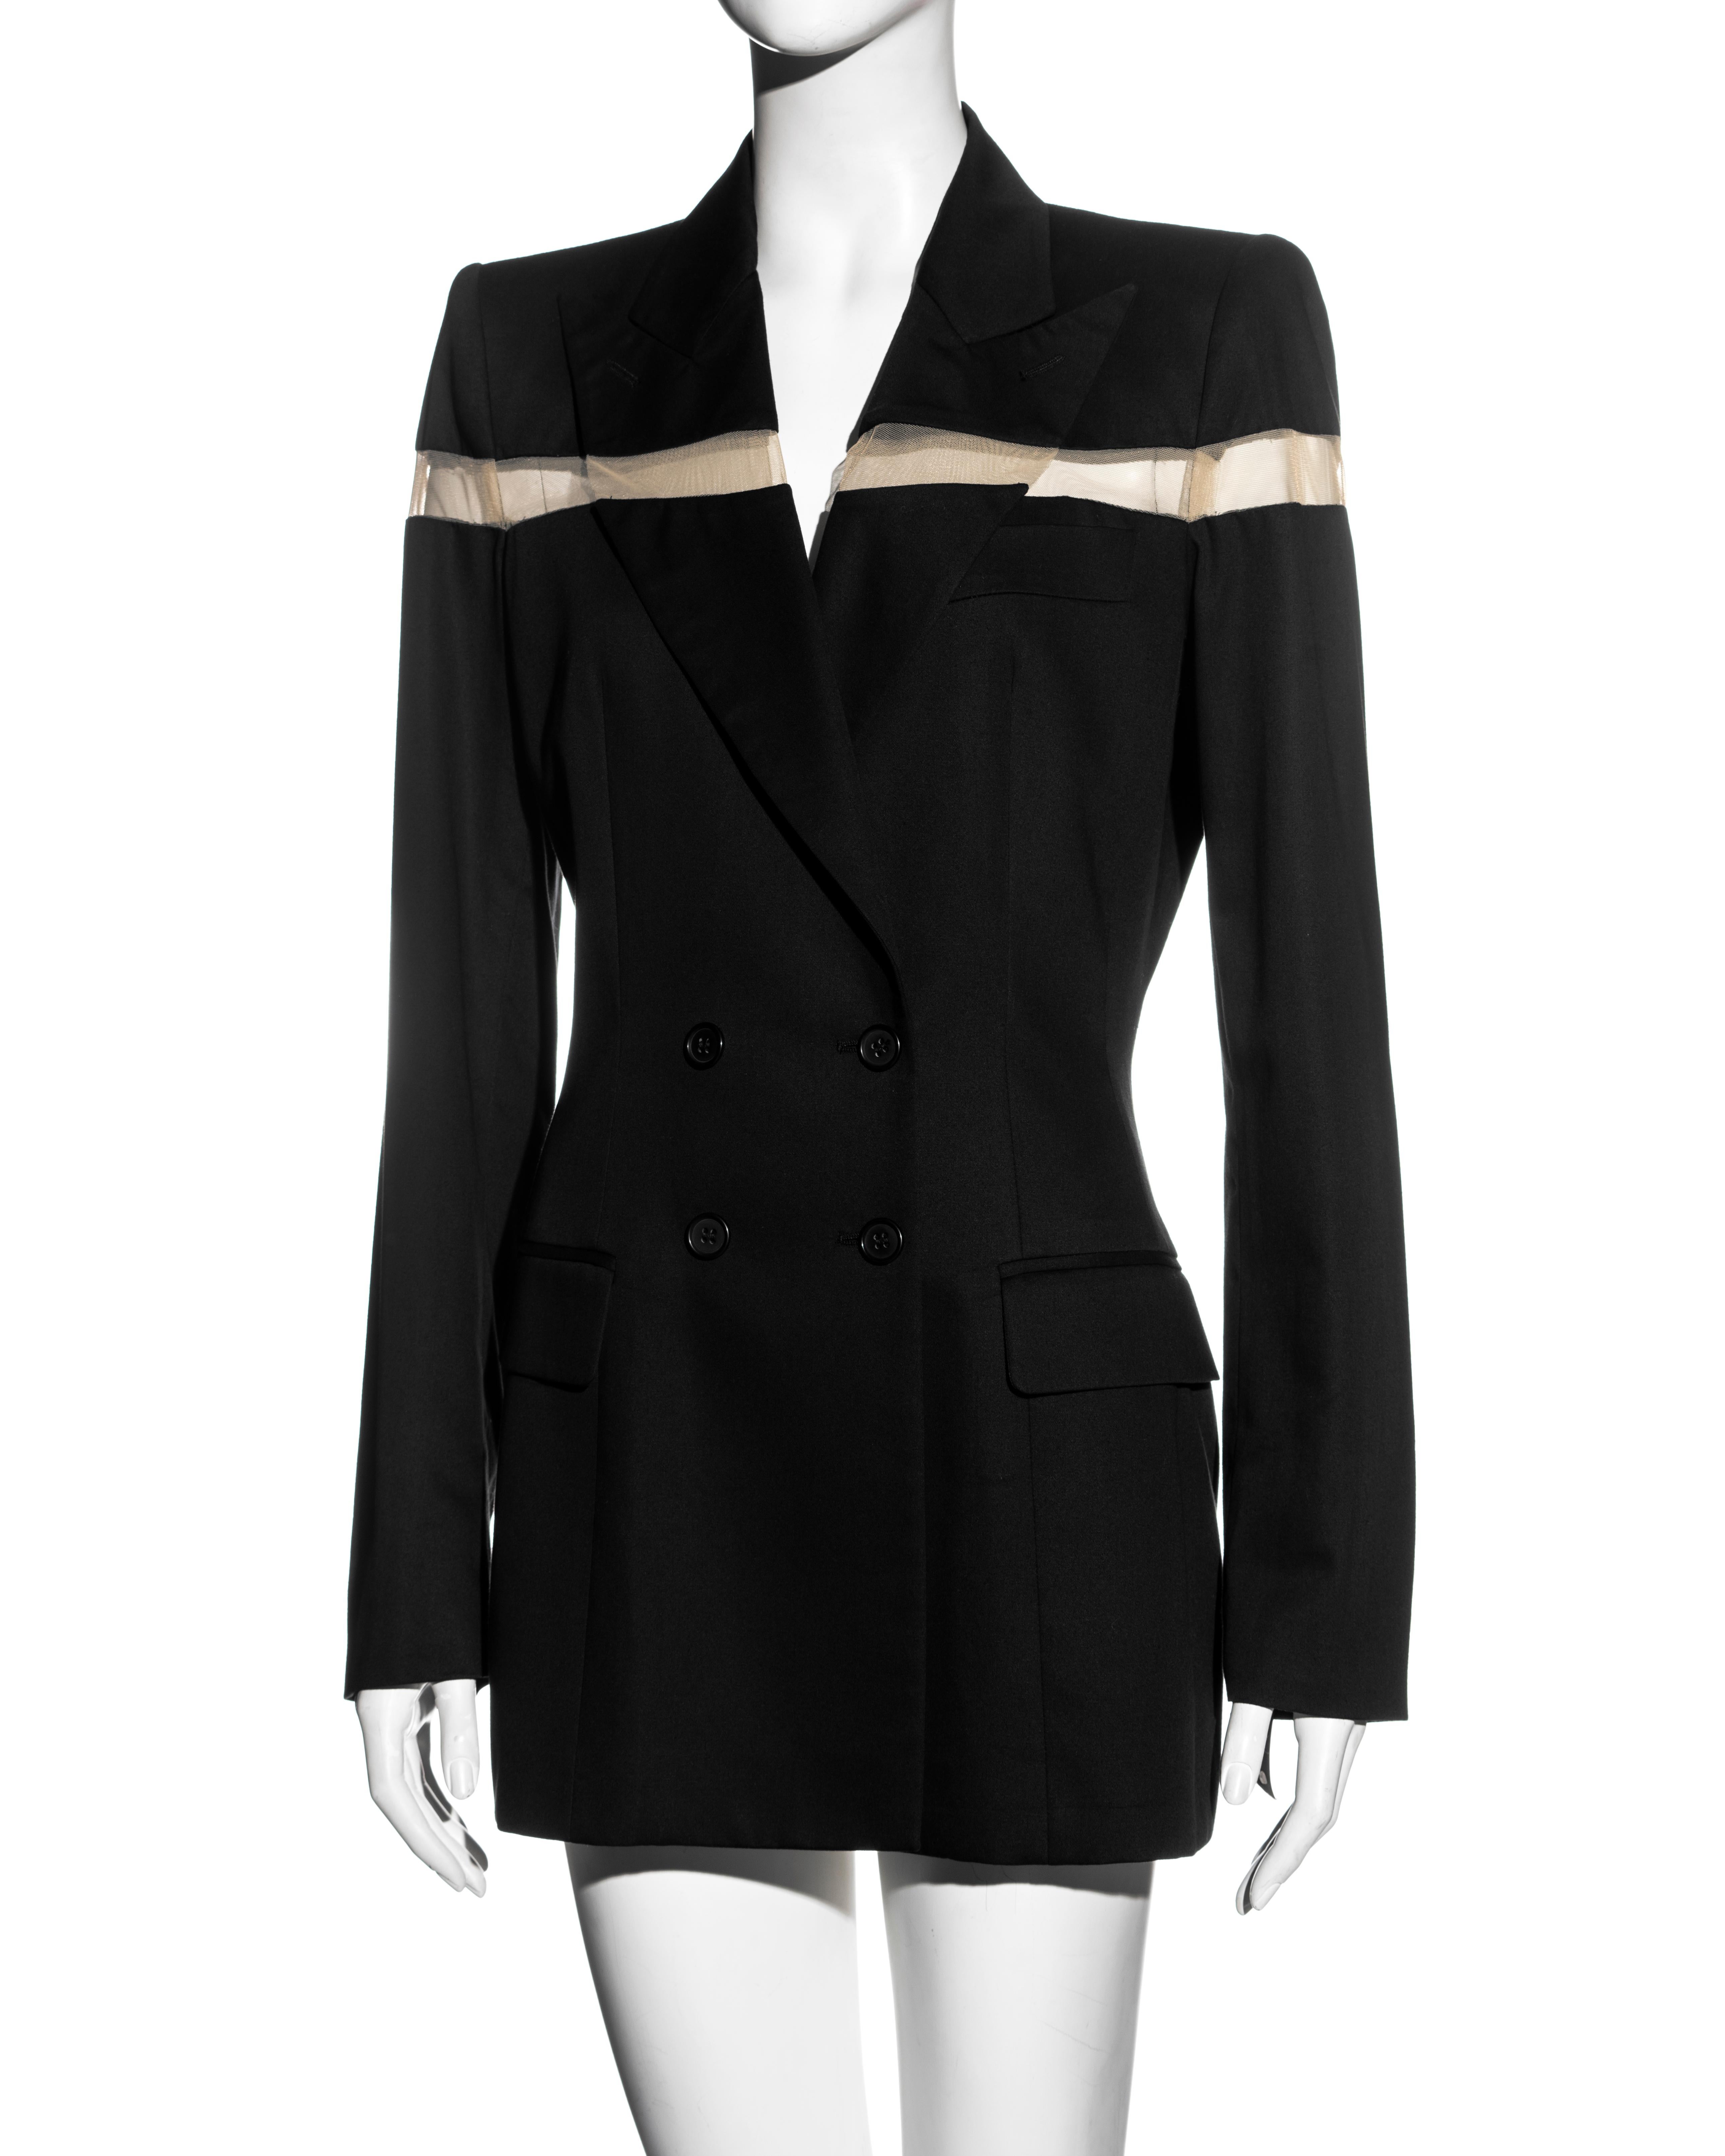 Alexander McQueen black double-breasted blazer mini dress with cut-out, ss 1998 For Sale 2